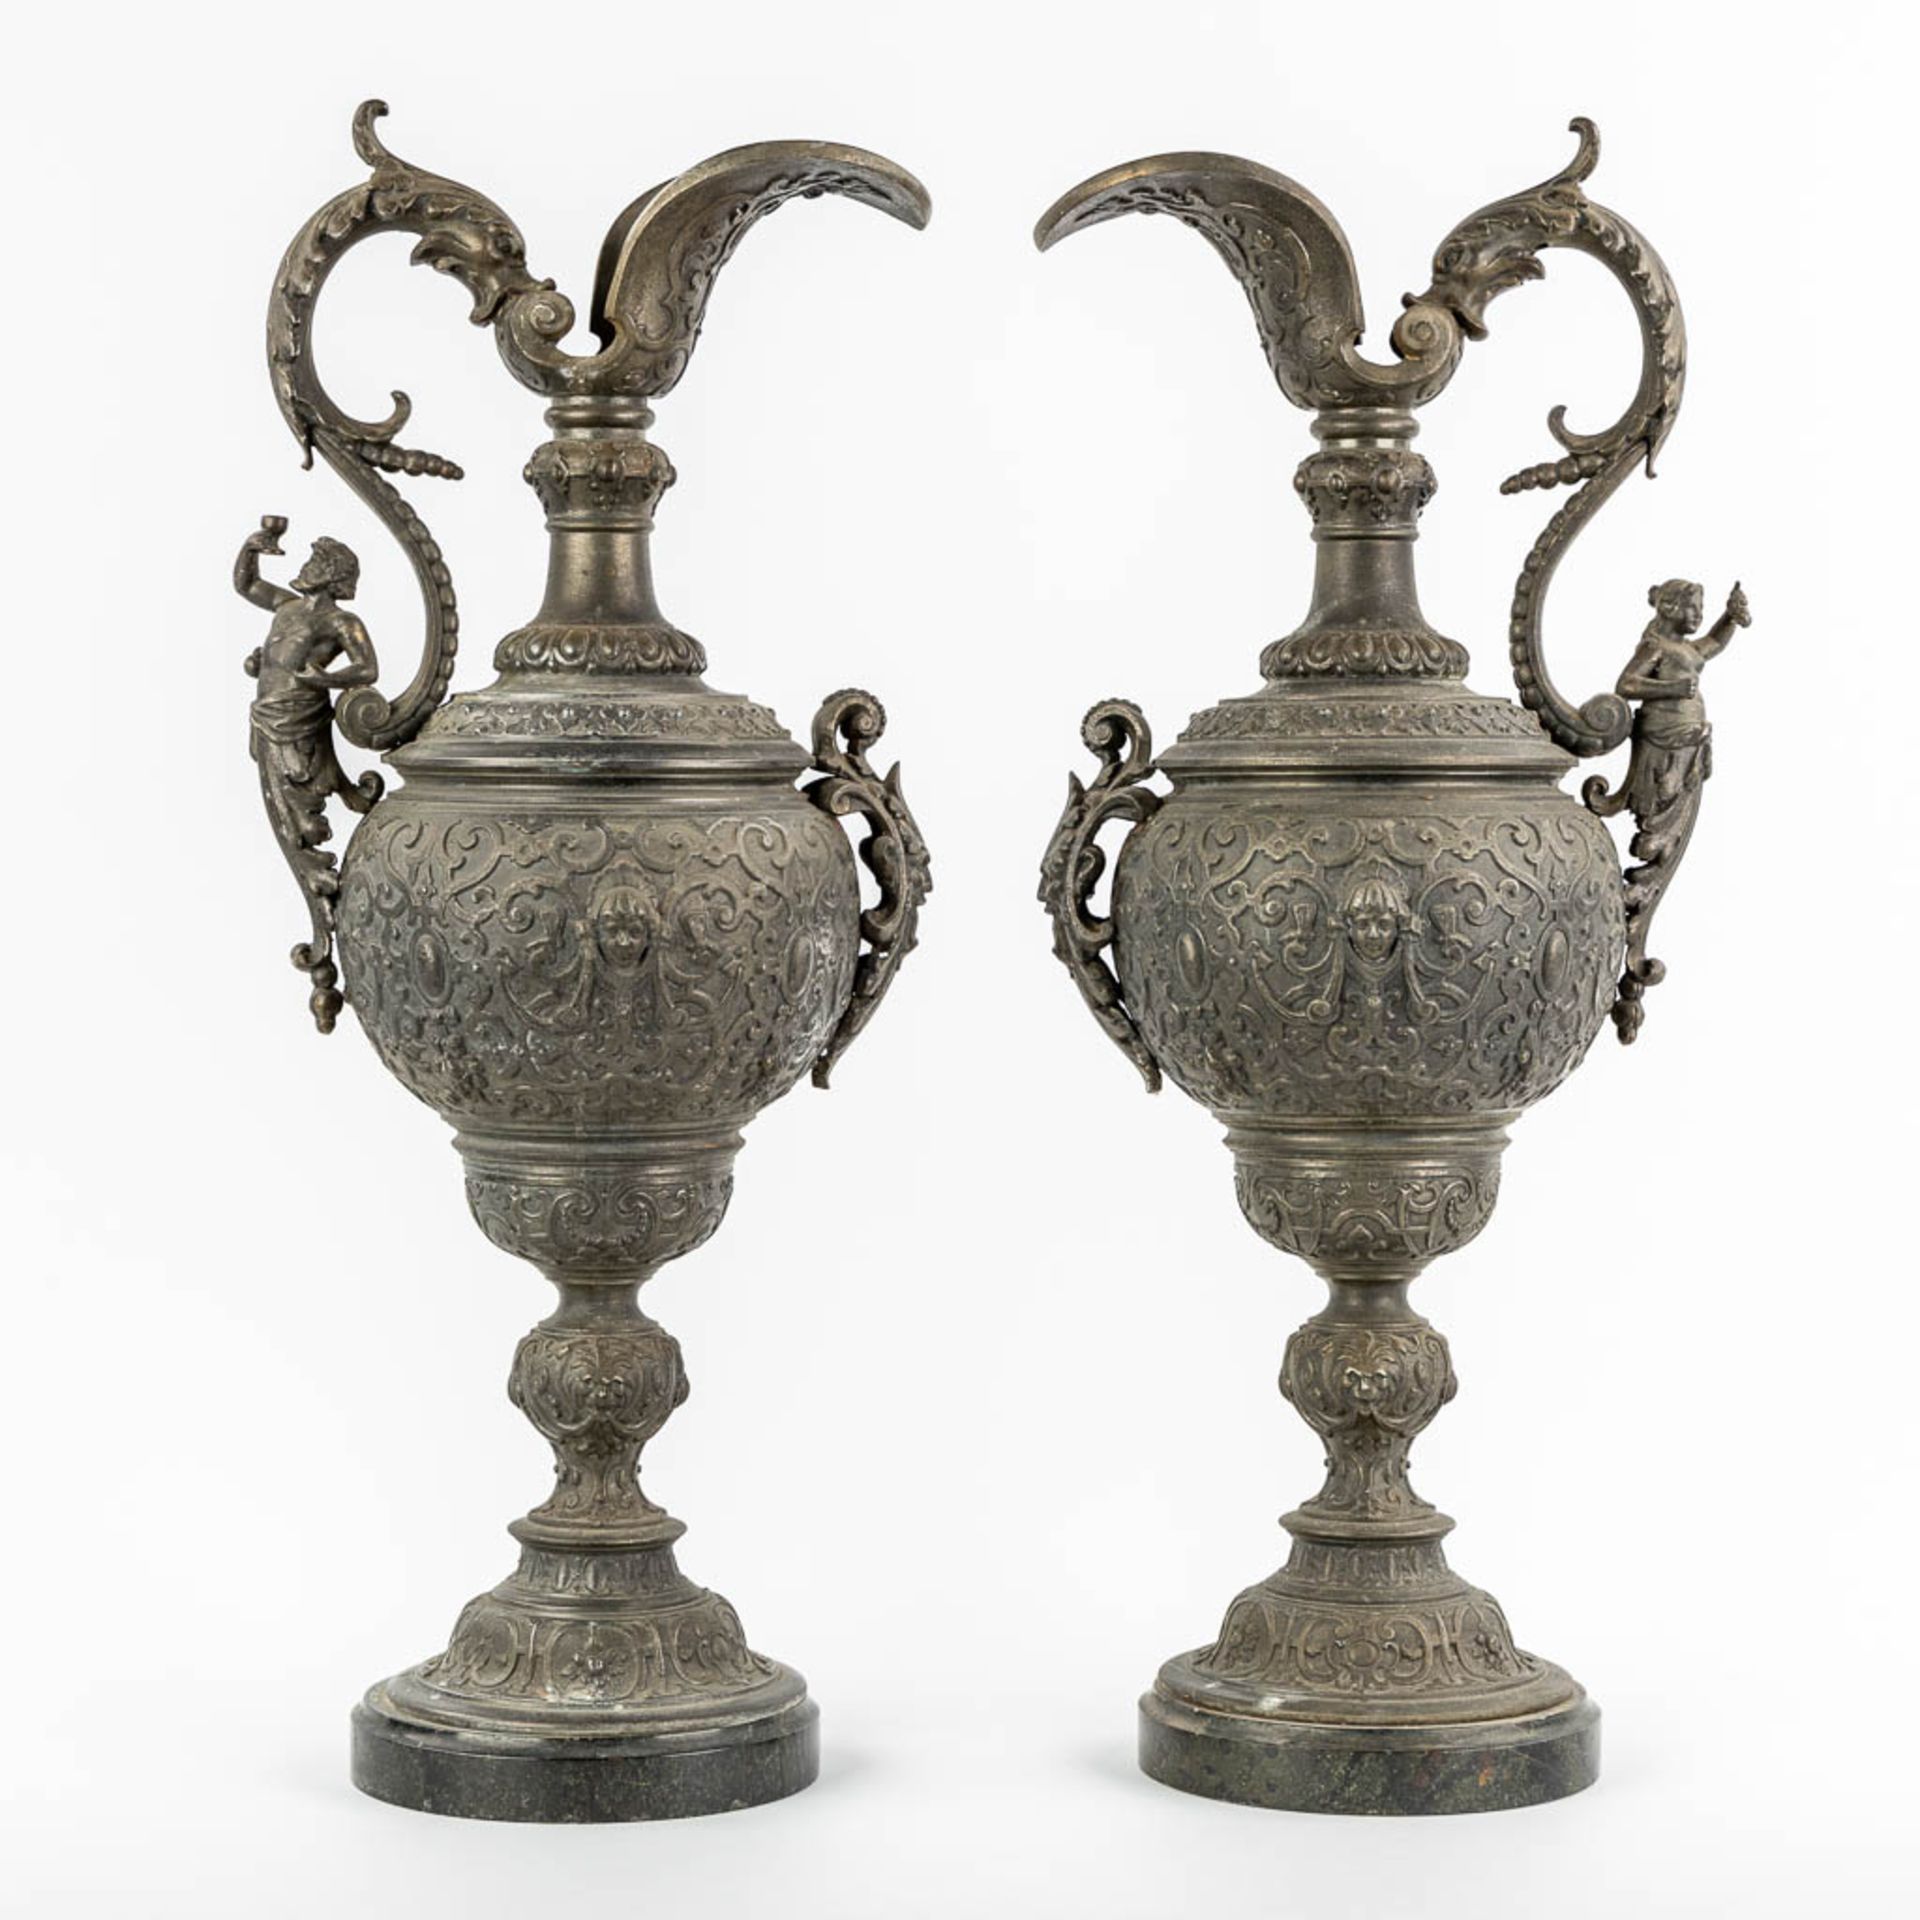 A pair of decorative pitchers, spelter on a marble base. Circa 1900. (L:18 x W:23 x H:56 cm) - Image 3 of 14